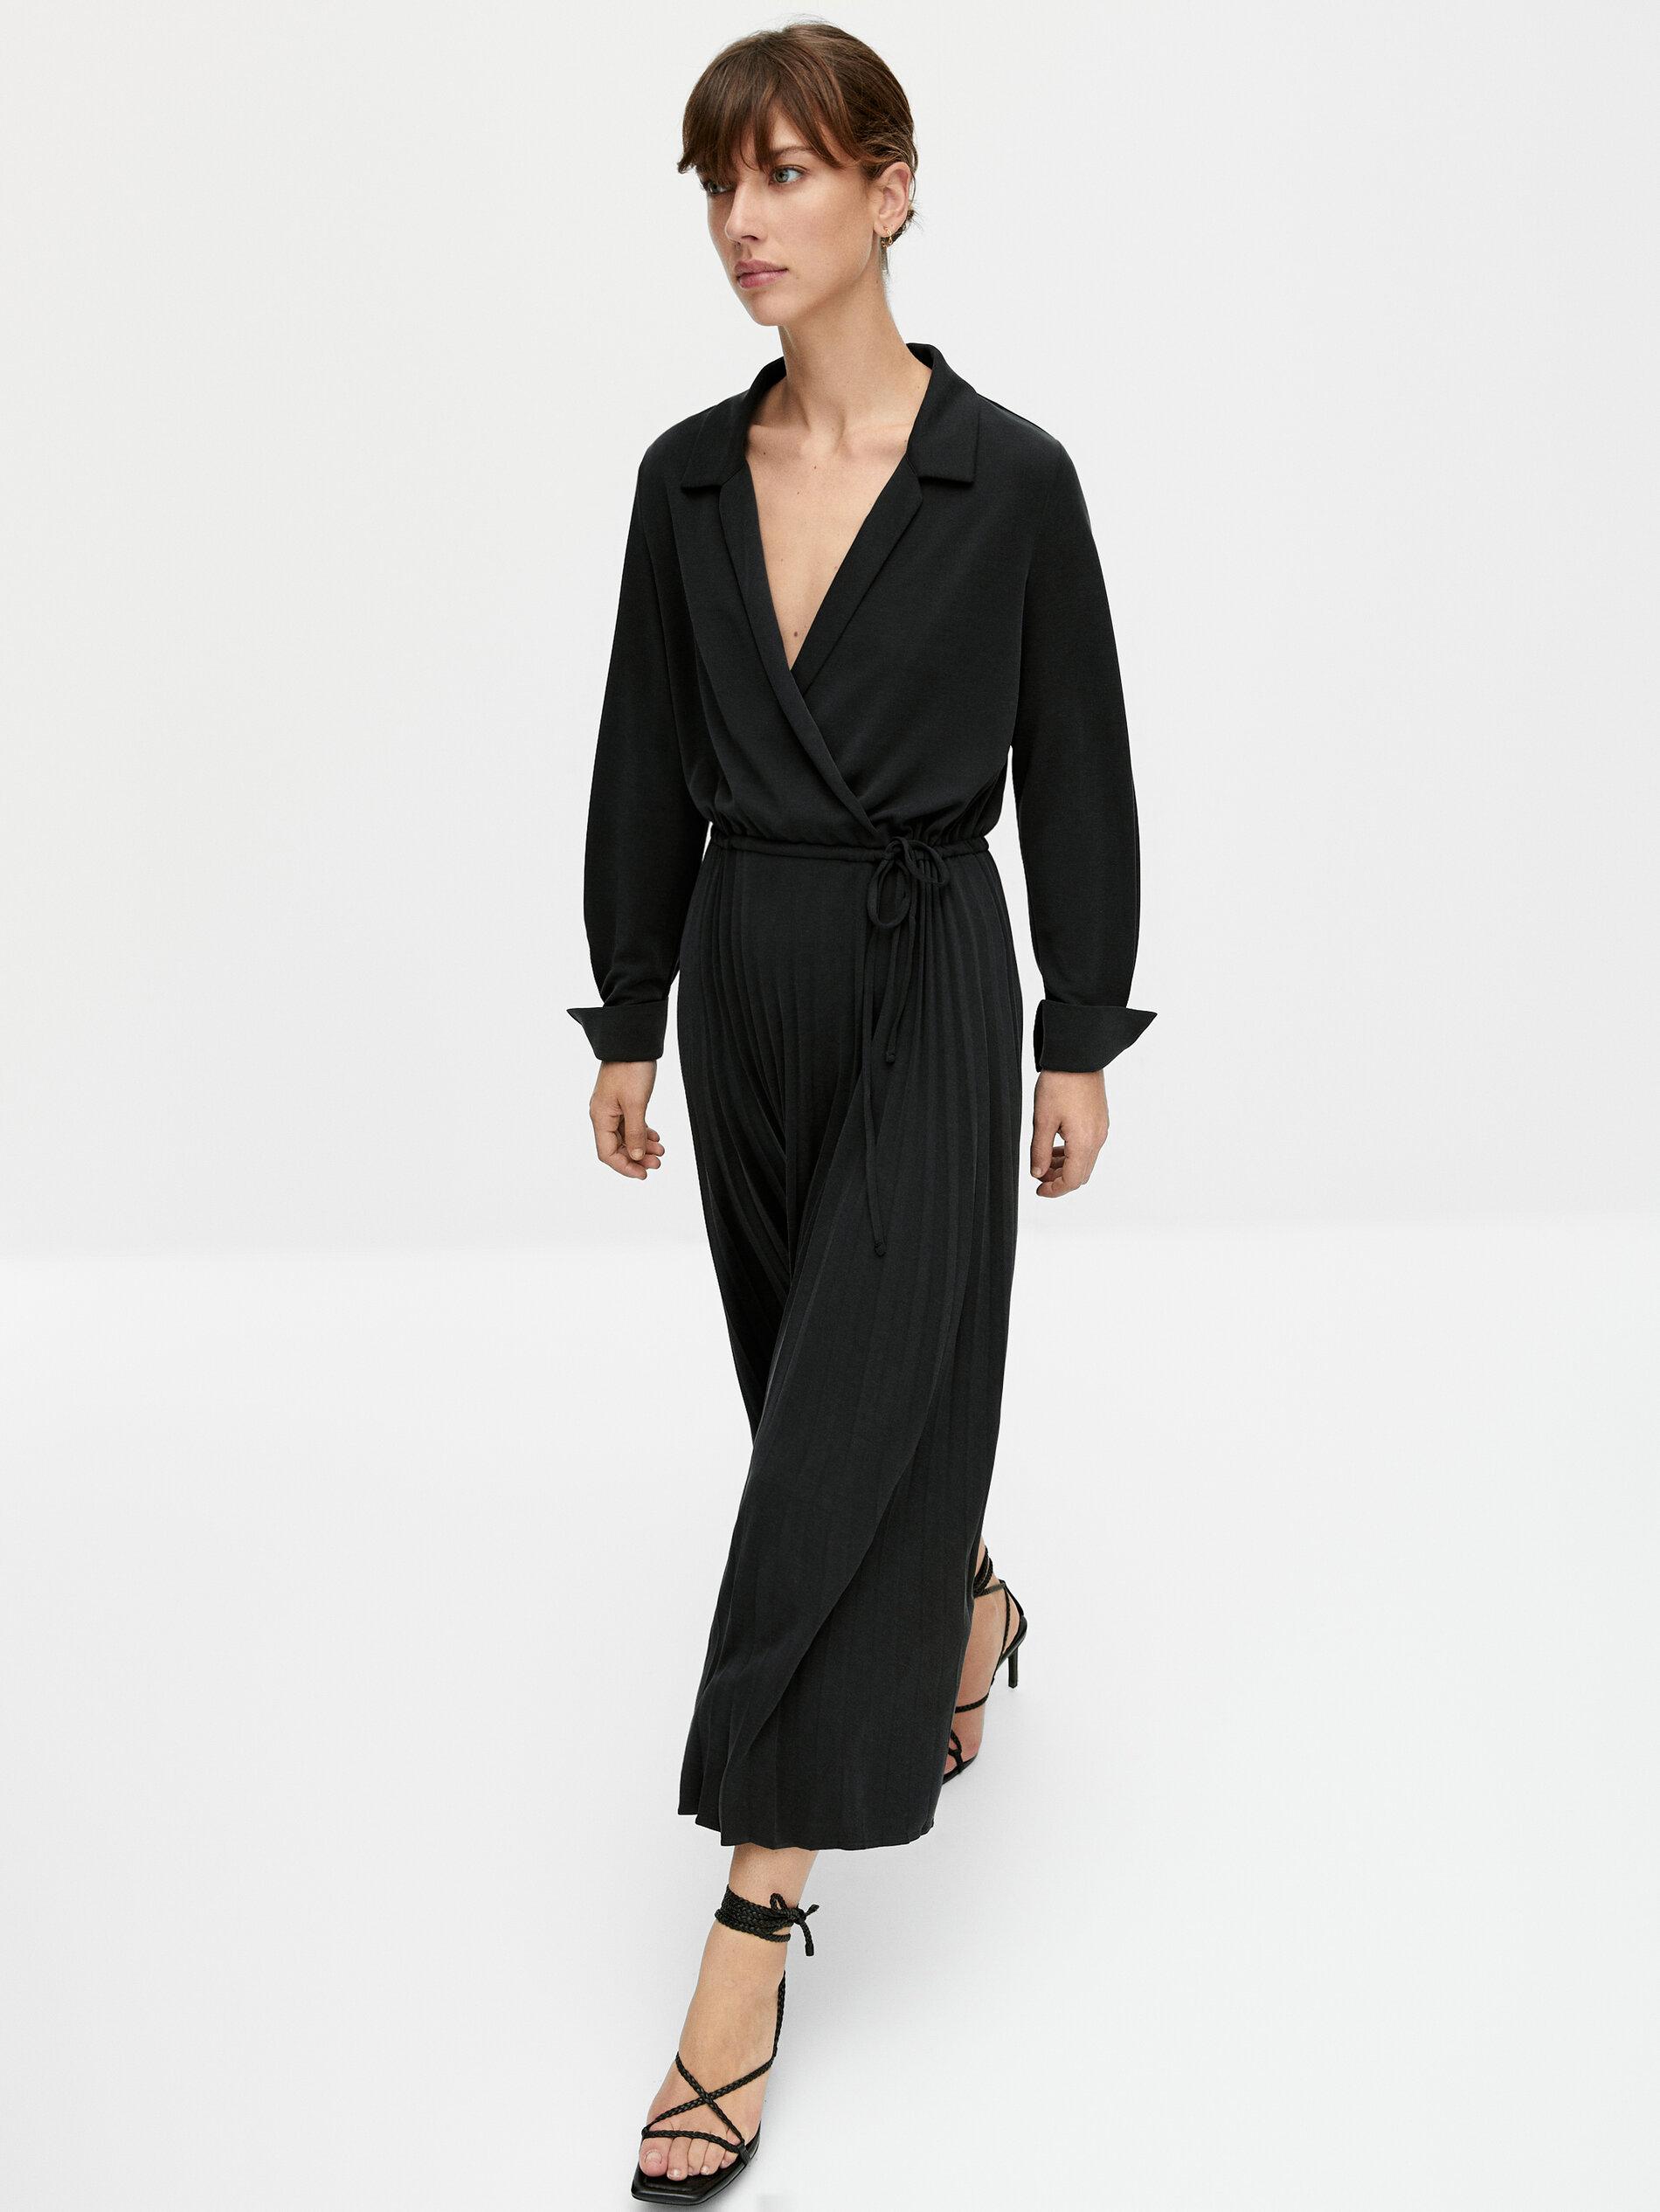 Surplice dress with pleated skirt